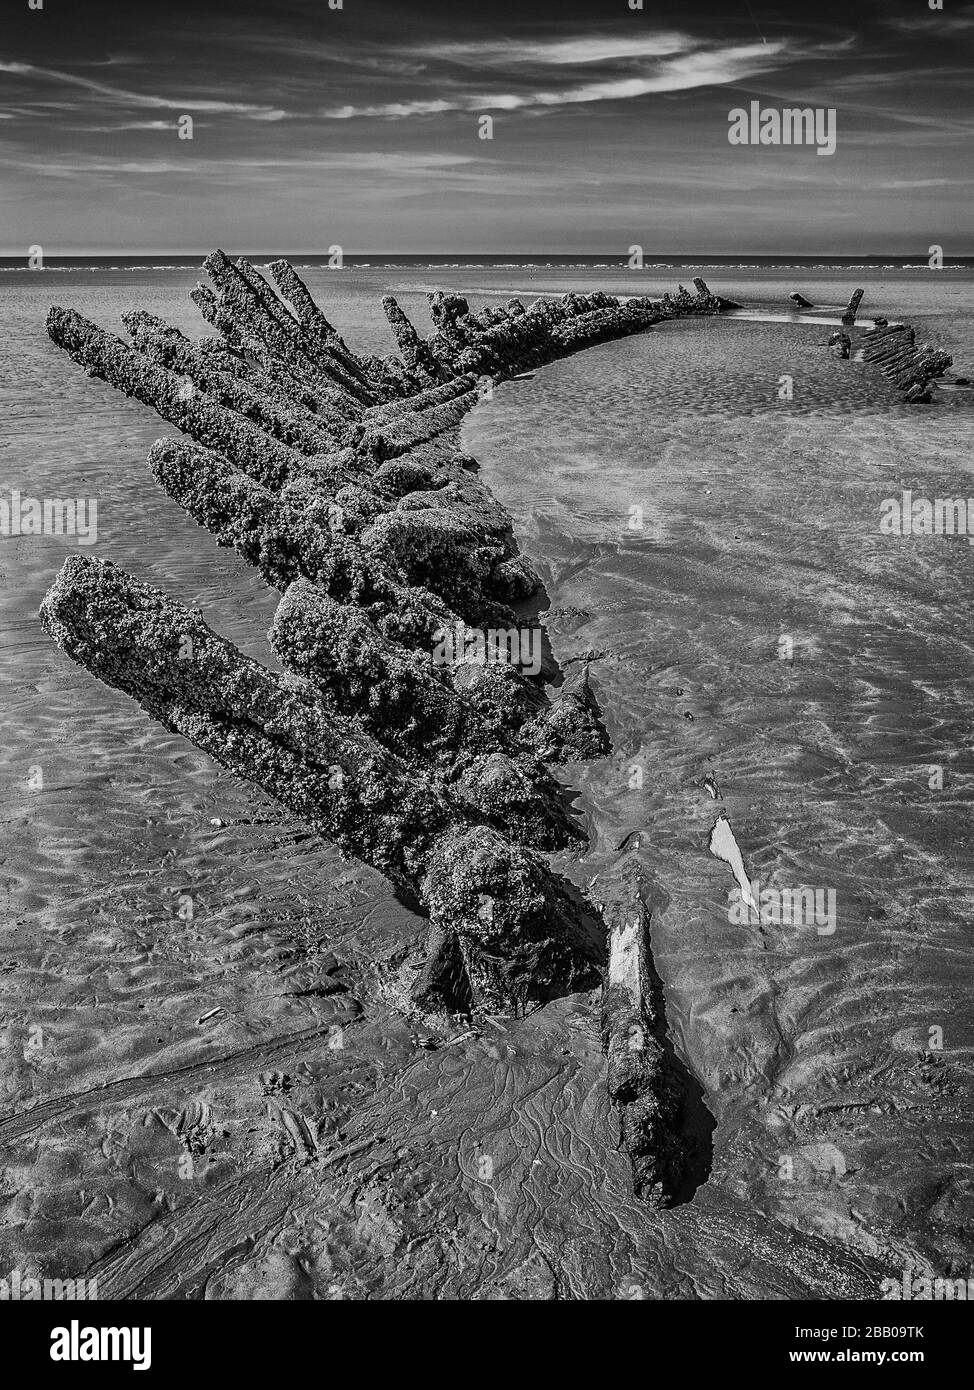 Black and white image of the barnacle encrusted hull of a shipwreck Stock Photo